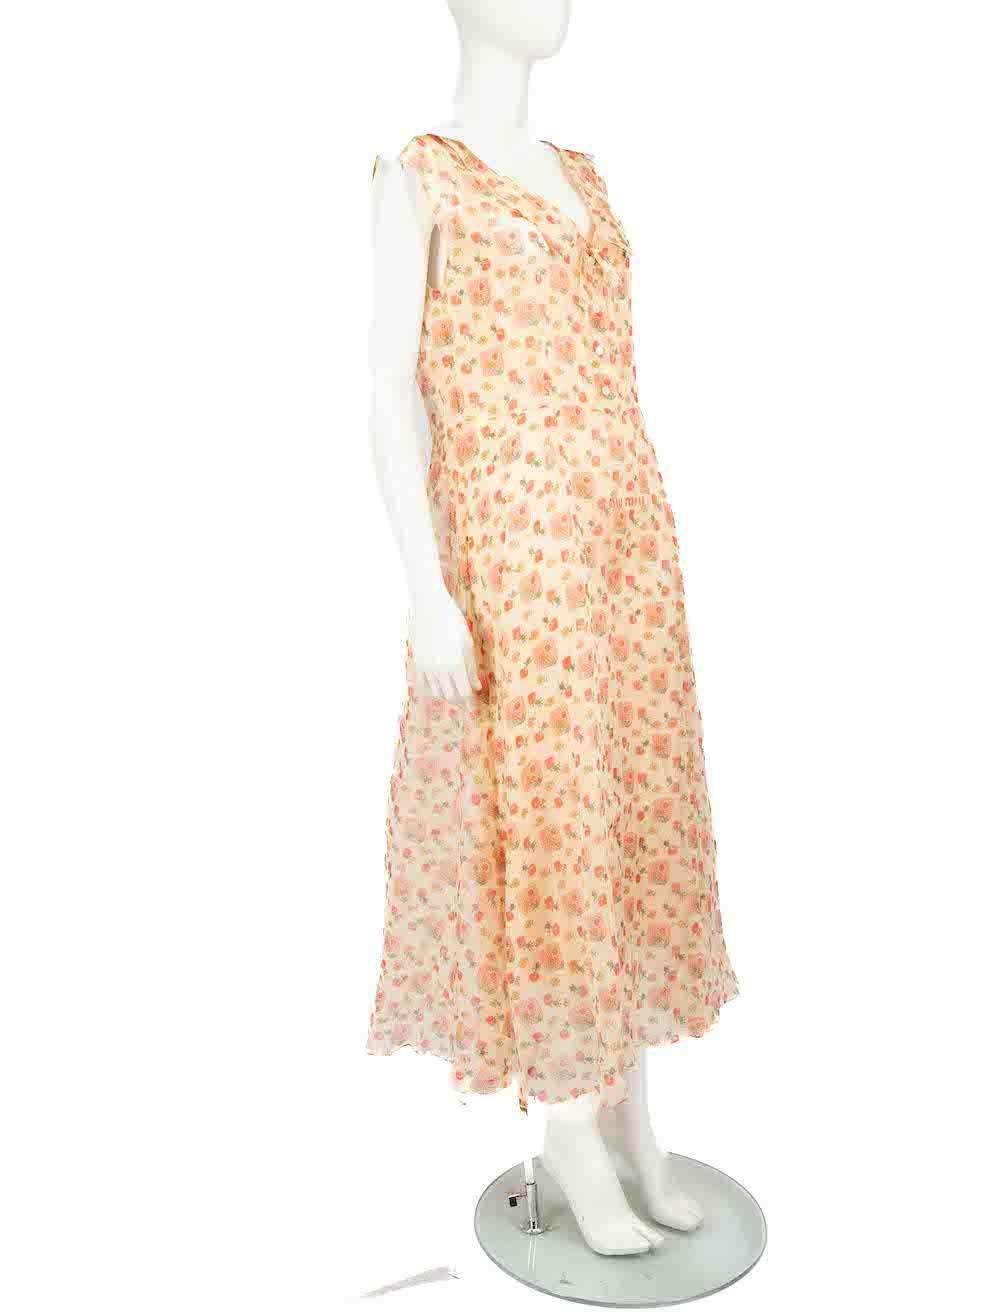 CONDITION is Never worn, with tags. No visible wear to dress is evident. However a small discolouration mark is seen on the collar due to poor storage on this new Miu Miu designer resale item.
 
 
 
 Details
 
 
 Beige
 
 Cotton
 
 Midi dress
 
